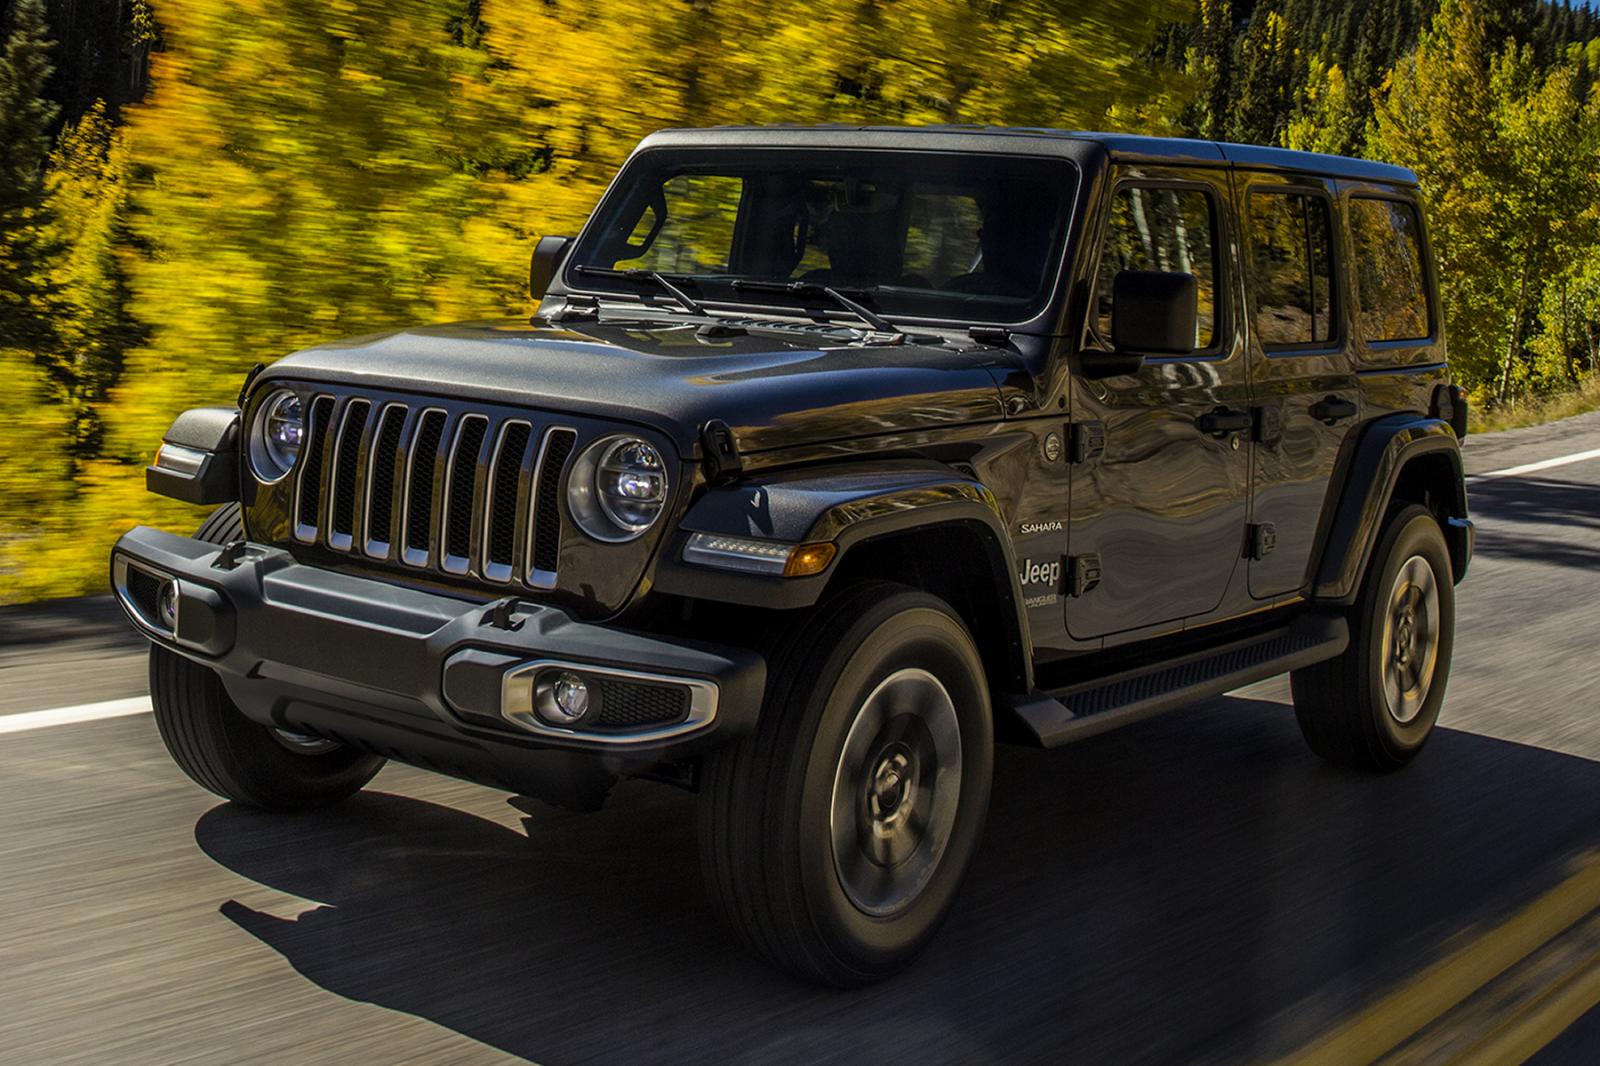 Jeep Wrangler 2018 Philippines Review: The purest off-road vehicle you are  looking around